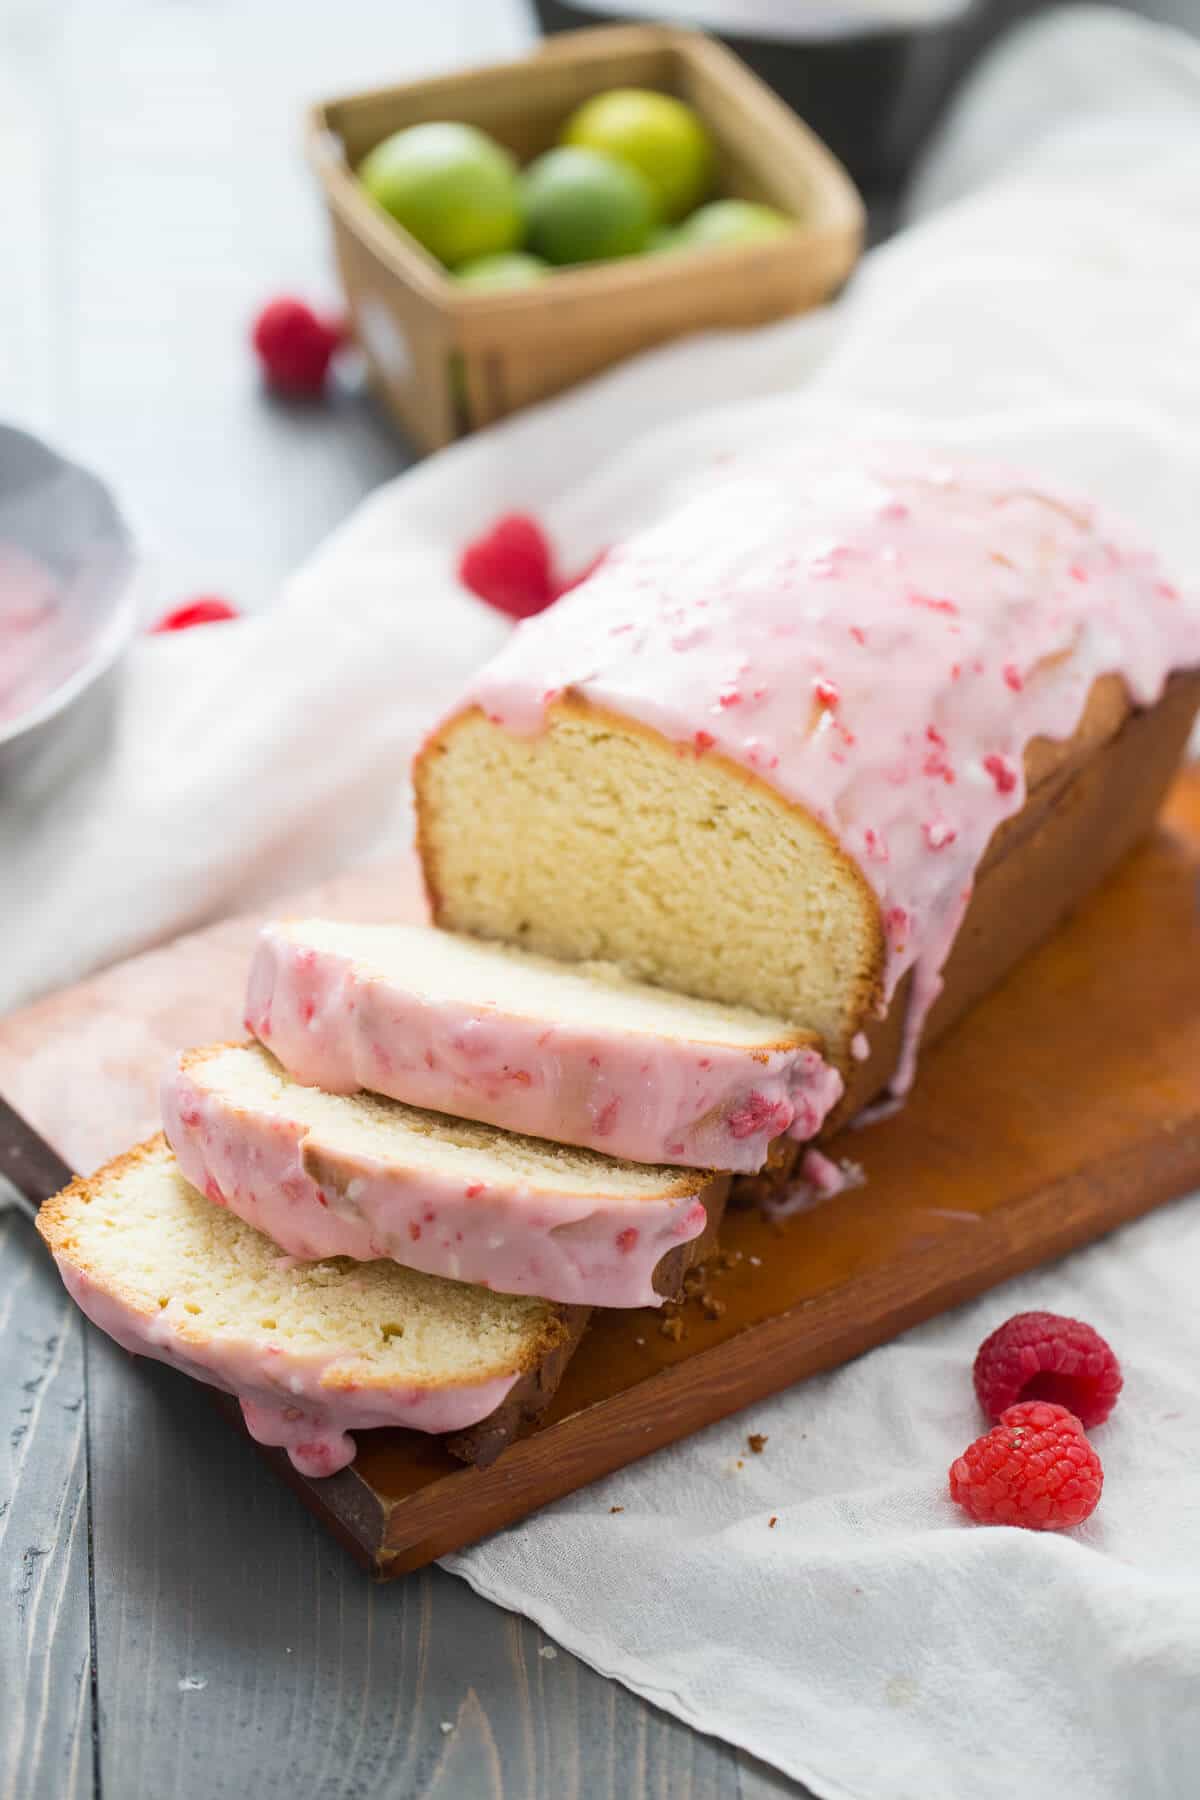 Raspberry Glazed Key Lime Cake is amazing! This pound cake loaf is a tangy key lime cake that is drizzled with a sweet, homemade raspberry glaze.  Everything about this easy cake screams happiness!